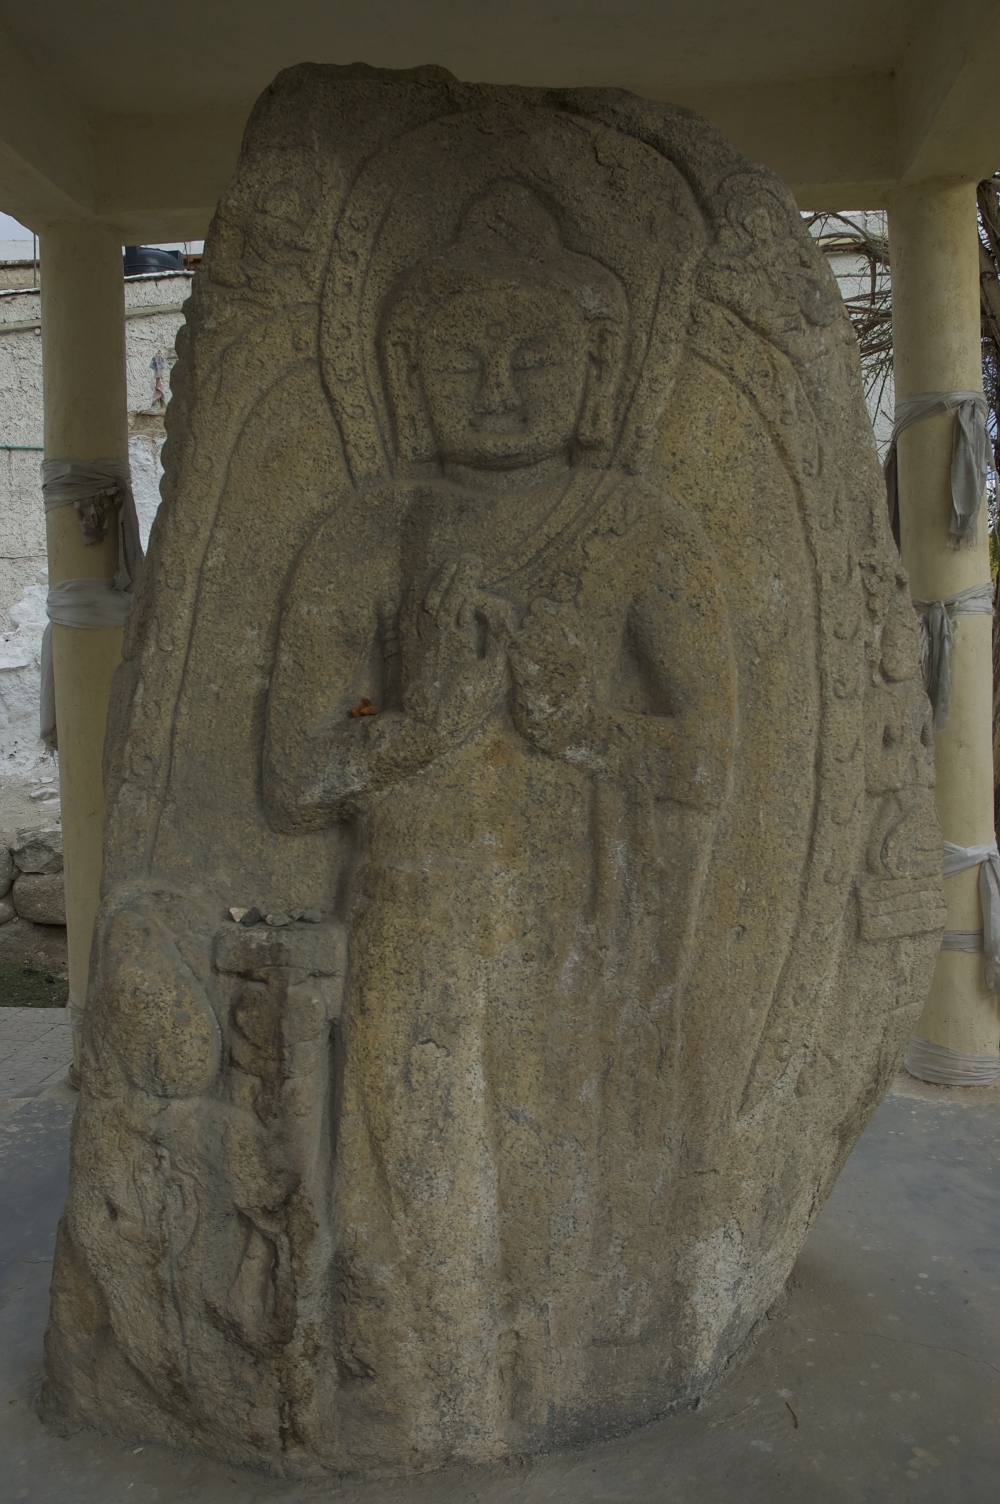 Fig. 6: Changspa has reliefs of Maitreya Buddha and Avalokitesvara on the reverse sides of a stone in the midst of the old settlement area (Courtesy: Tashi Morup, 2004)